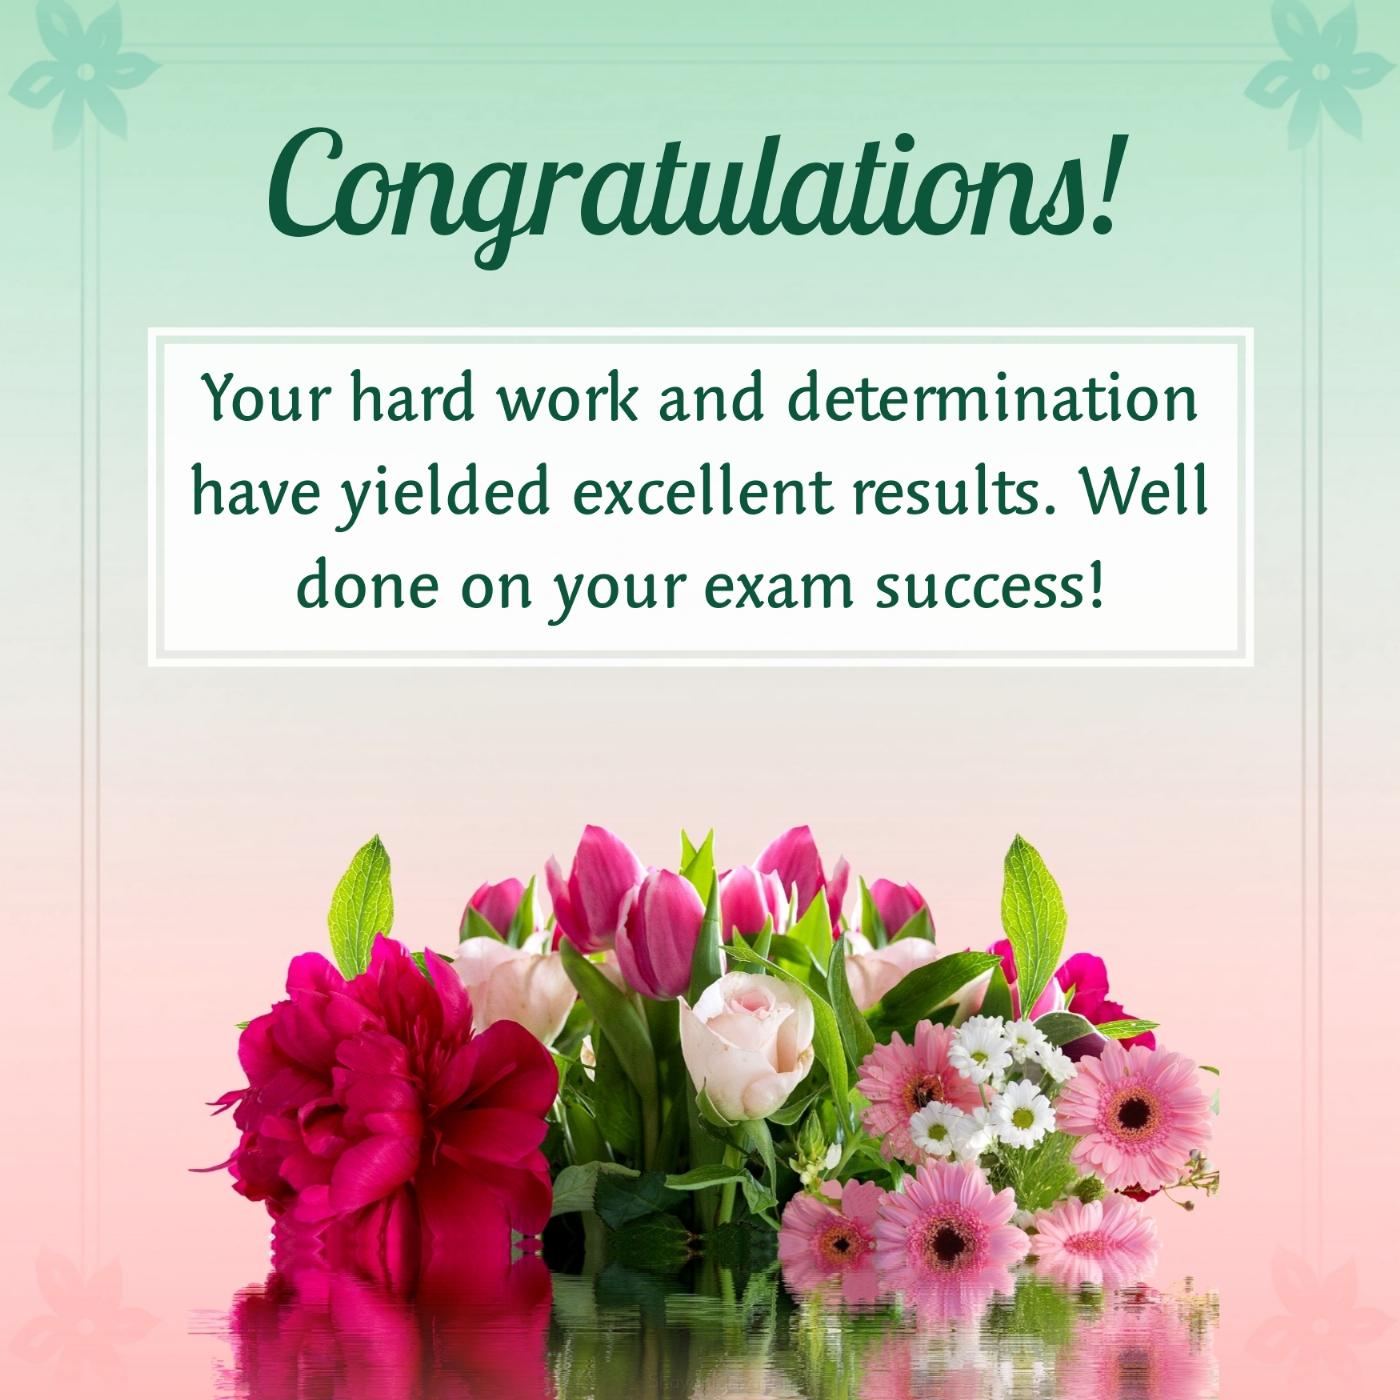 Your hard work and determination have yielded excellent results